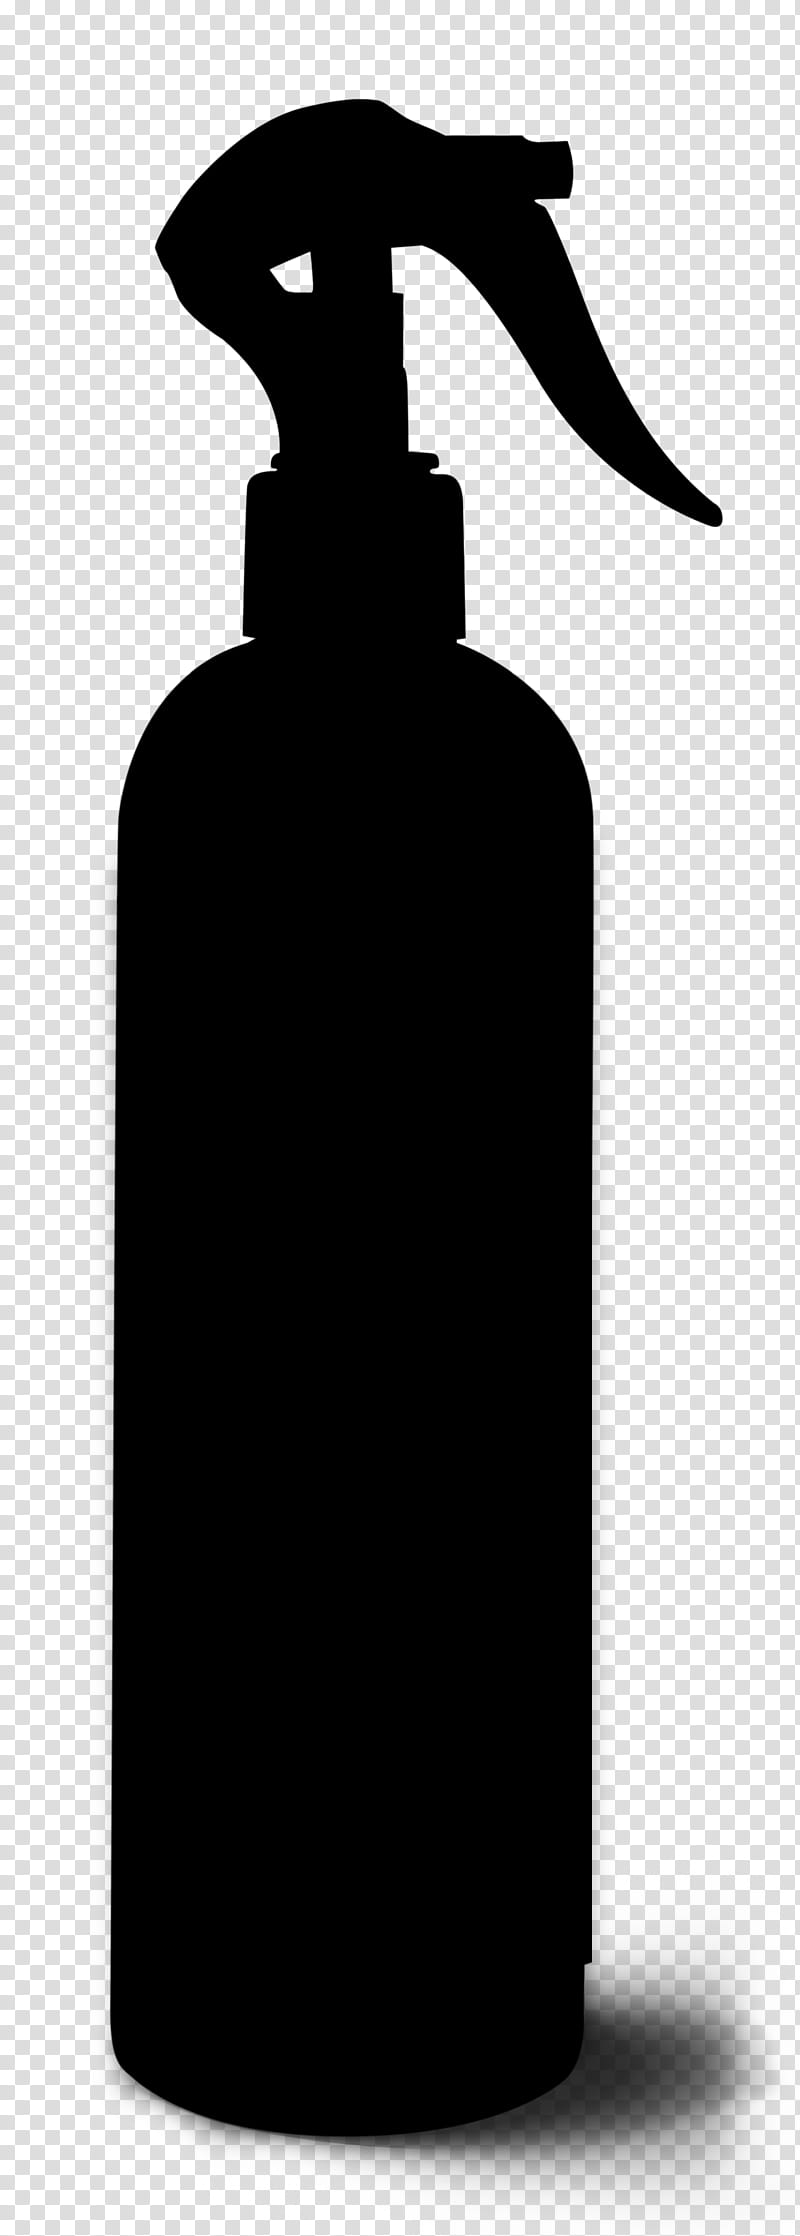 Plastic Bottle, Black White M, Silhouette, Water Bottle, Drinkware, Home Accessories, Wine Bottle transparent background PNG clipart